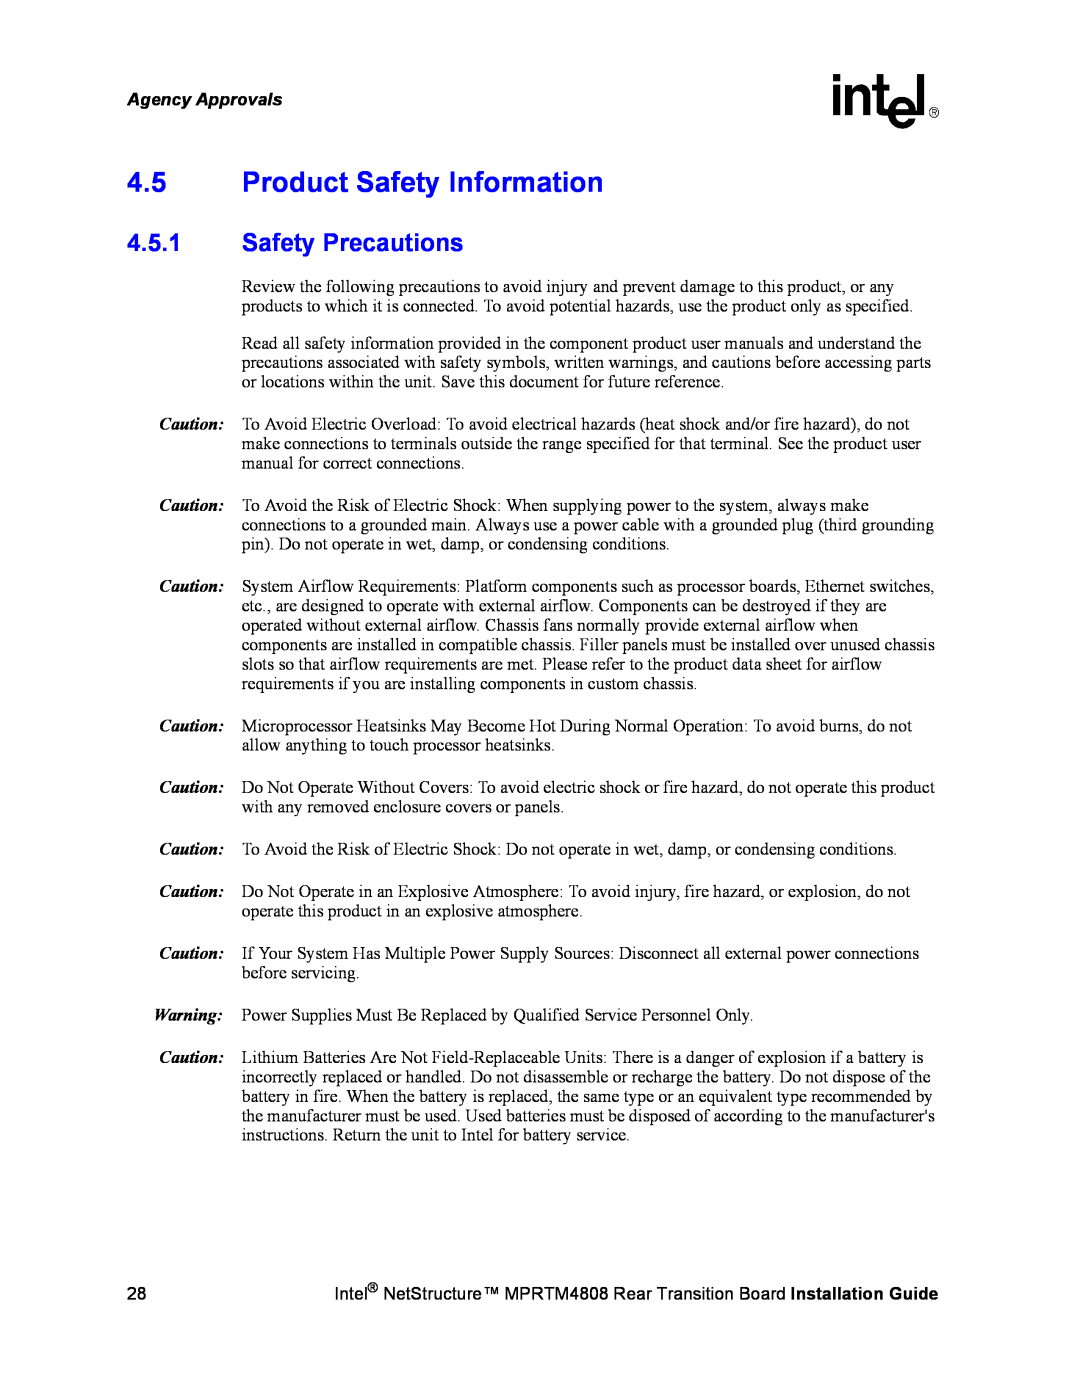 Intel MPRTM4808 manual 4.5Product Safety Information, 4.5.1Safety Precautions, Agency Approvals 